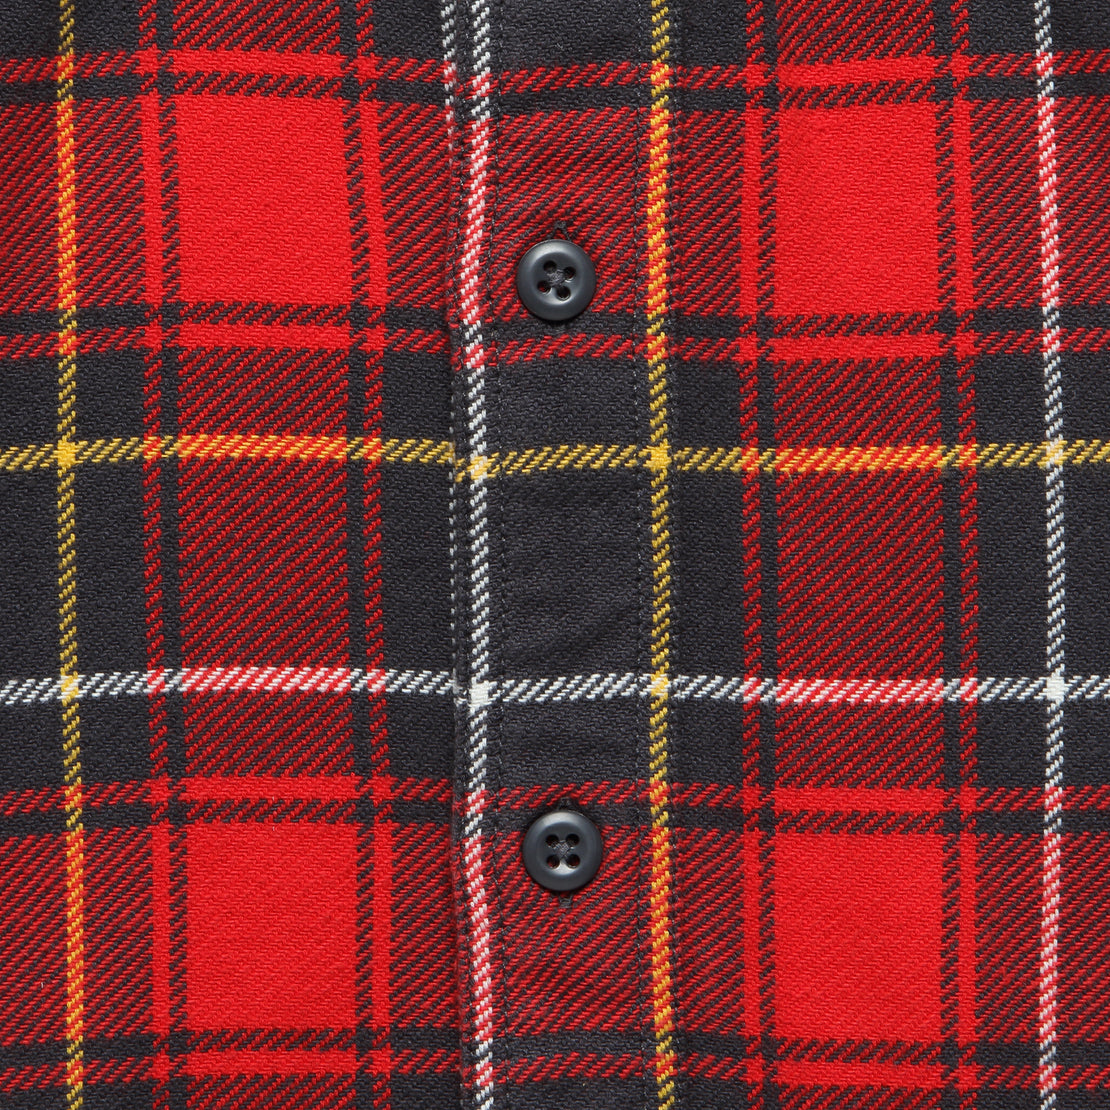 Vintage Flannel Workshirt - Red/Charcoal Plaid - Filson - STAG Provisions - Tops - L/S Woven - Plaid